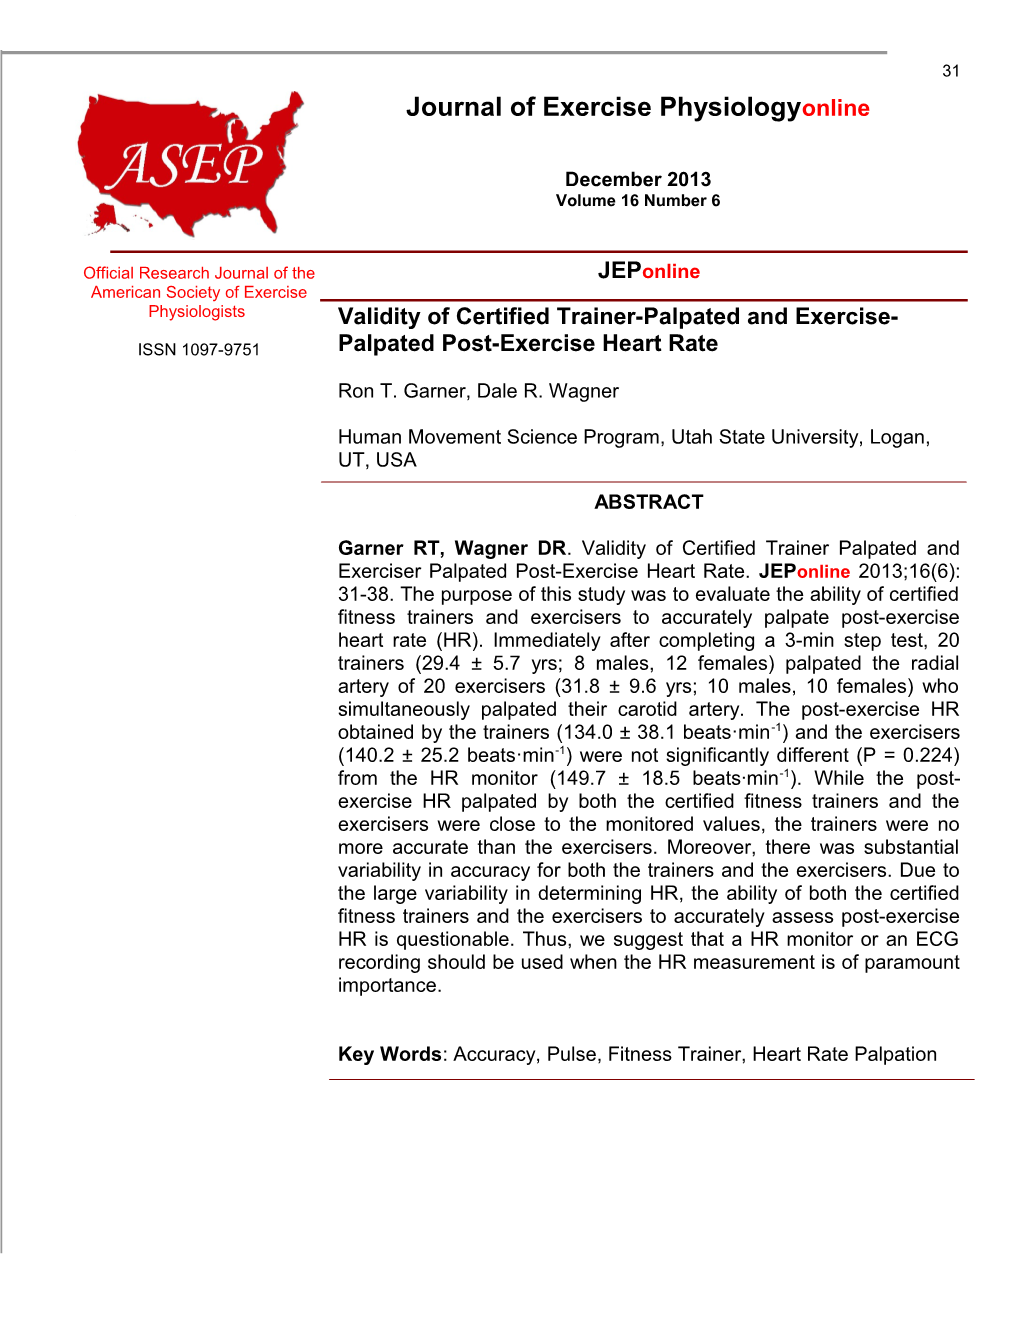 Validity of Certified Trainer-Palpated and Exercise-Palpated Post-Exercise Heart Rate